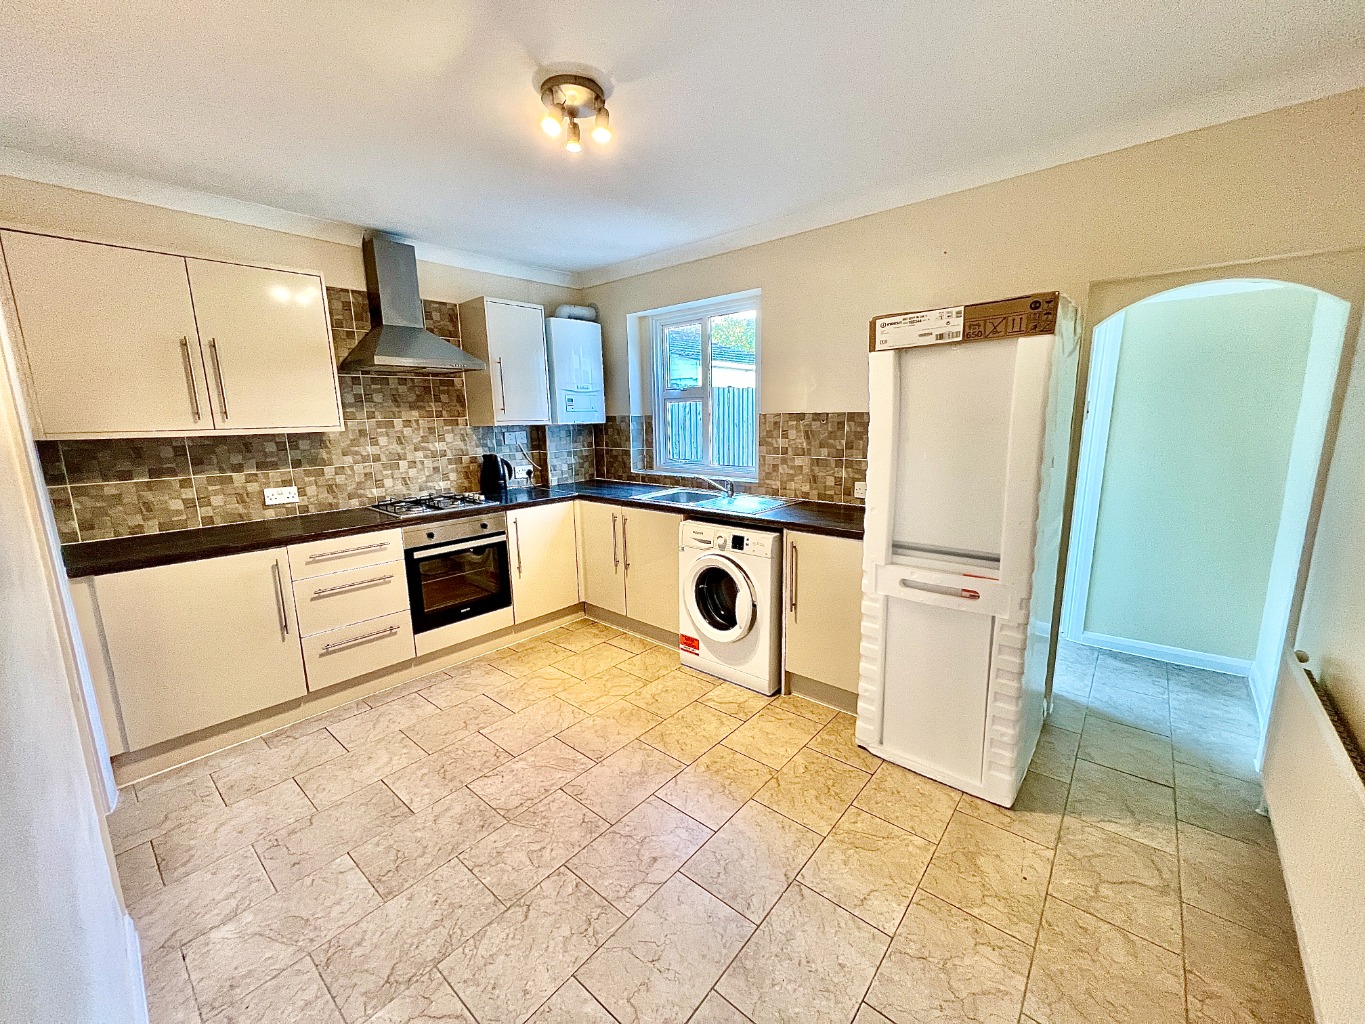 Beaumont Gibbs are offering this lovely two double bedroomed Victorian mid terrace house for rent. The property is situated in a nice residential road close-by to Winn & Plumstead Common.